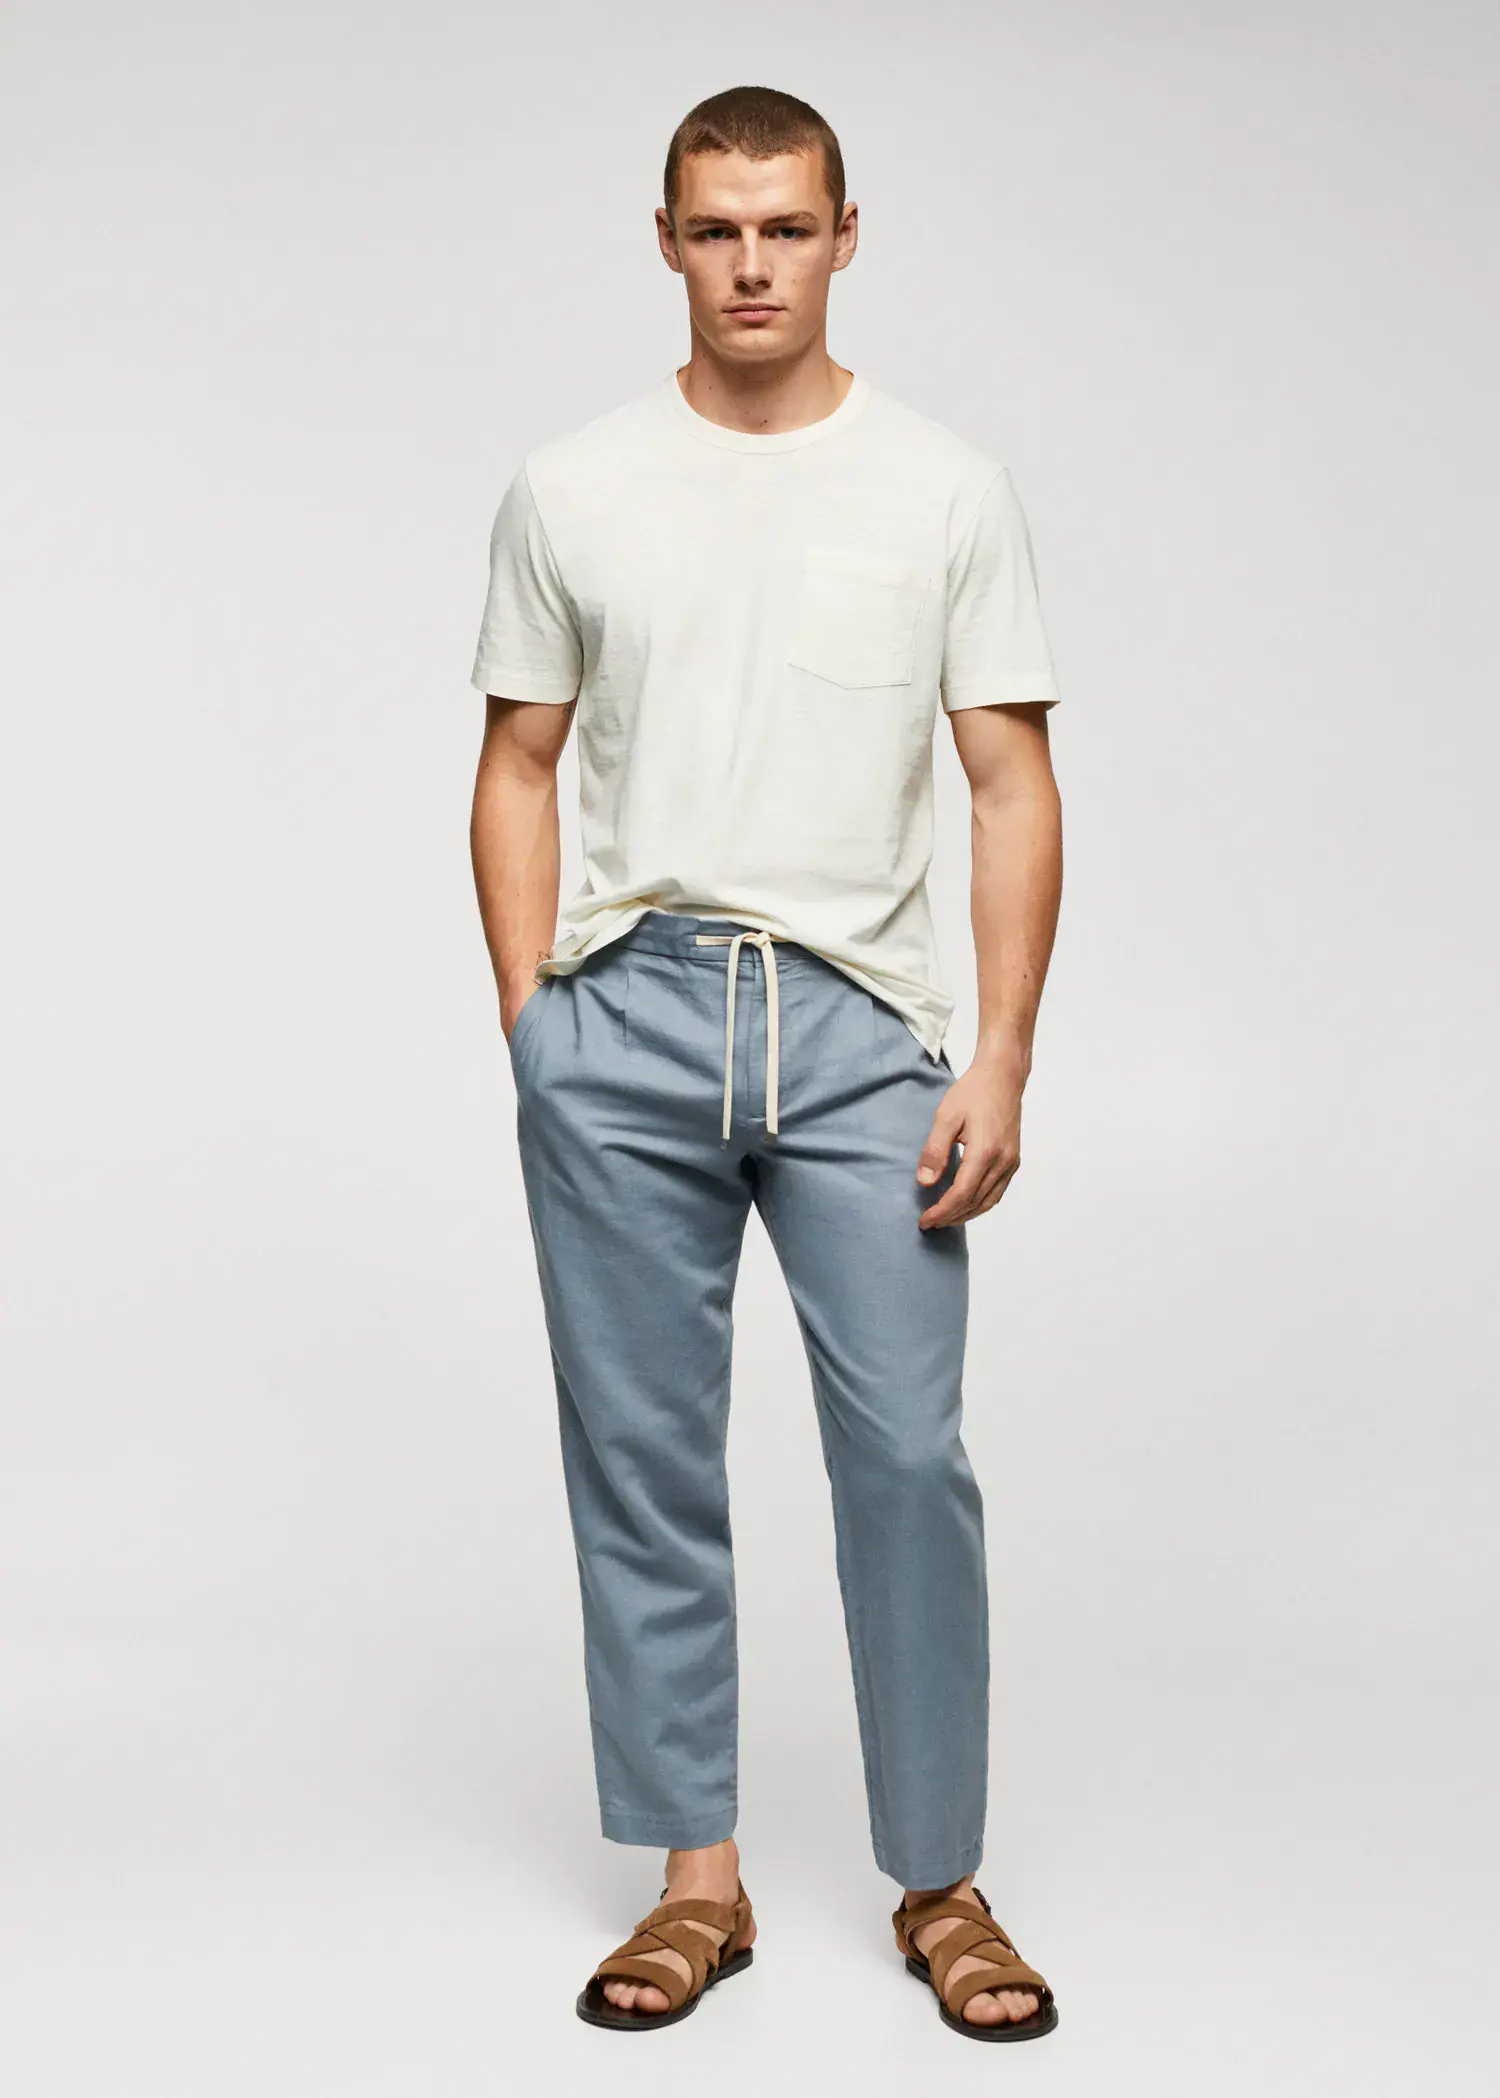 Mango 100% cotton t-shirt with pocket. a man in a white t-shirt and blue pants. 